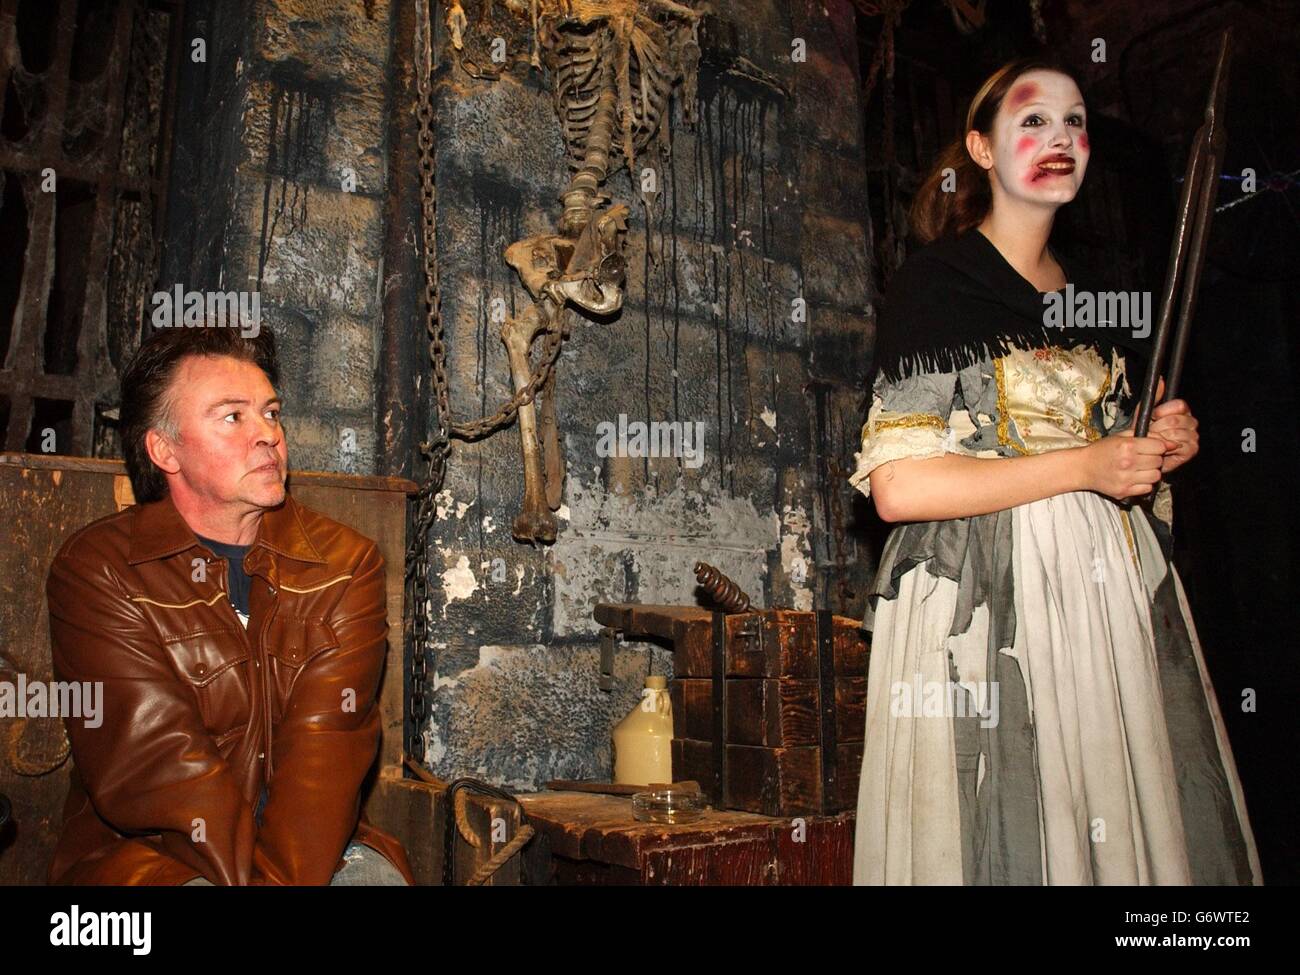 Singer Paul Young is shown a demonstration of an tongue extraction instrument at the London Dungeon, central London, during the launch of the new 1 million pound spine-chilling attraction Traitor: Boat Ride To Hell. Stock Photo